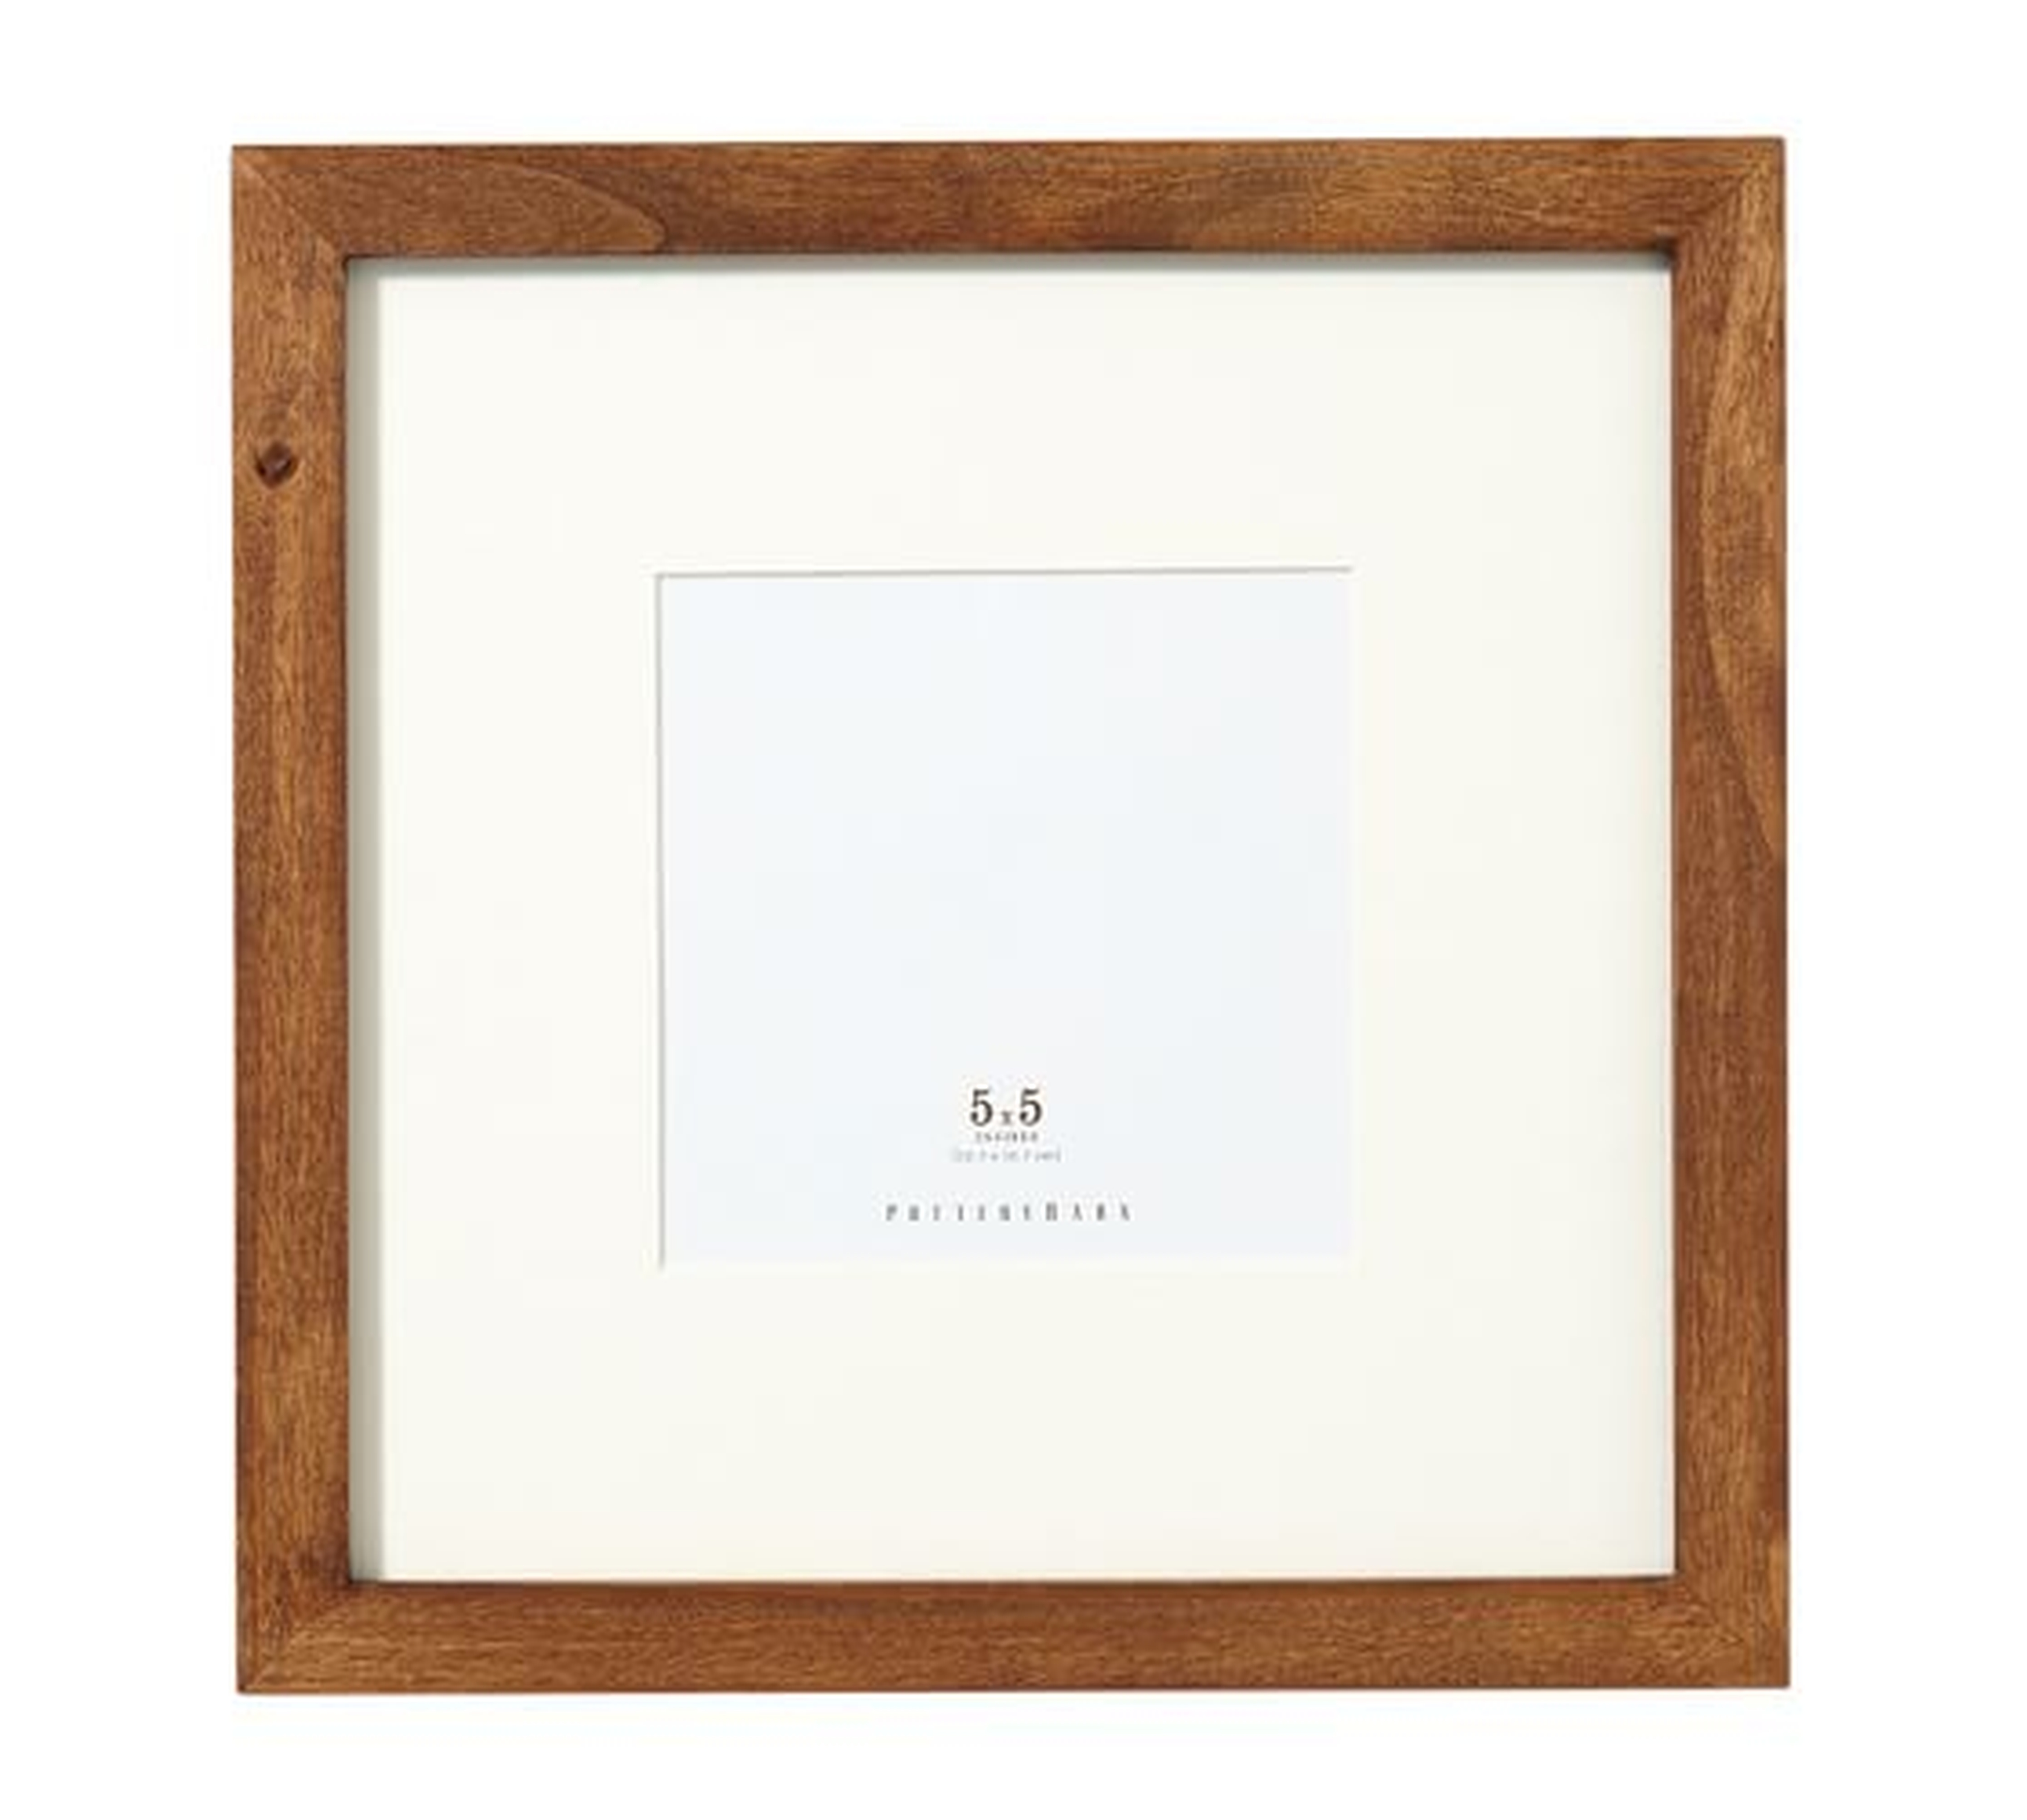 Wood Gallery Single Opening Frames - Rustic Wood - 5 x 5" Opening - Pottery Barn